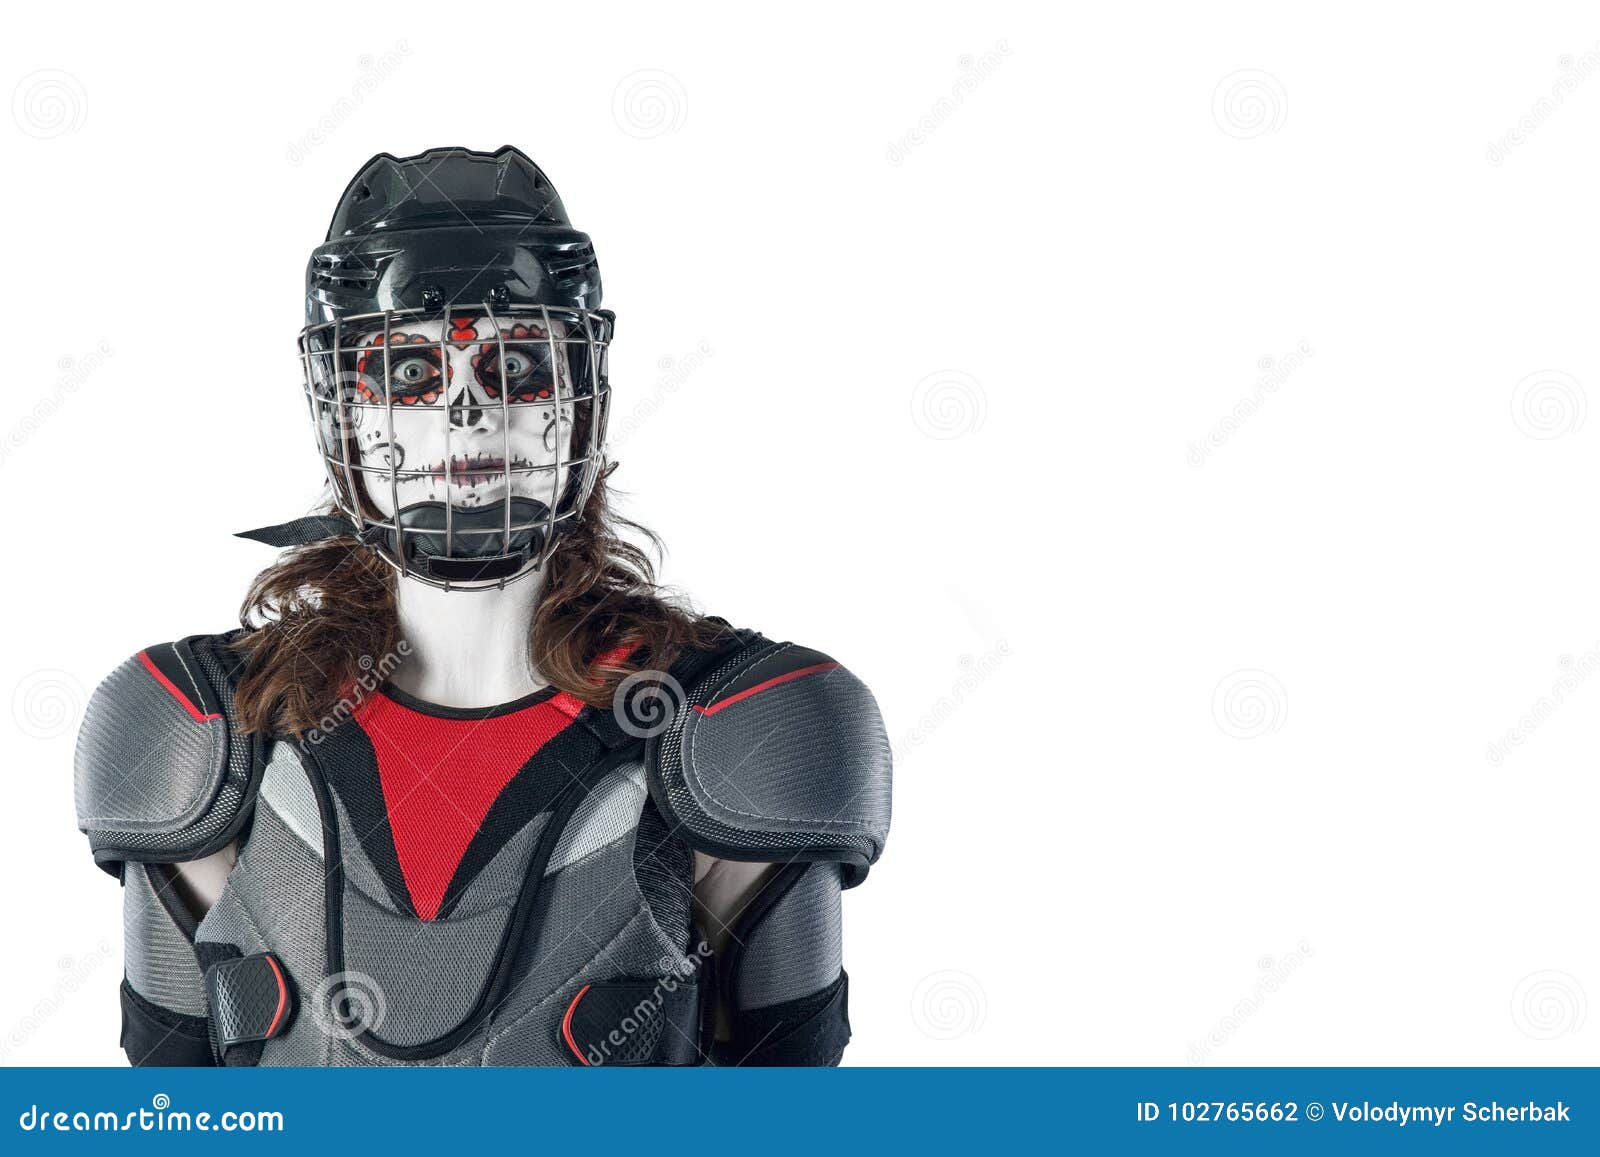 Happy Halloween. Hockey Player in a Hockey Helmet and Mask Against